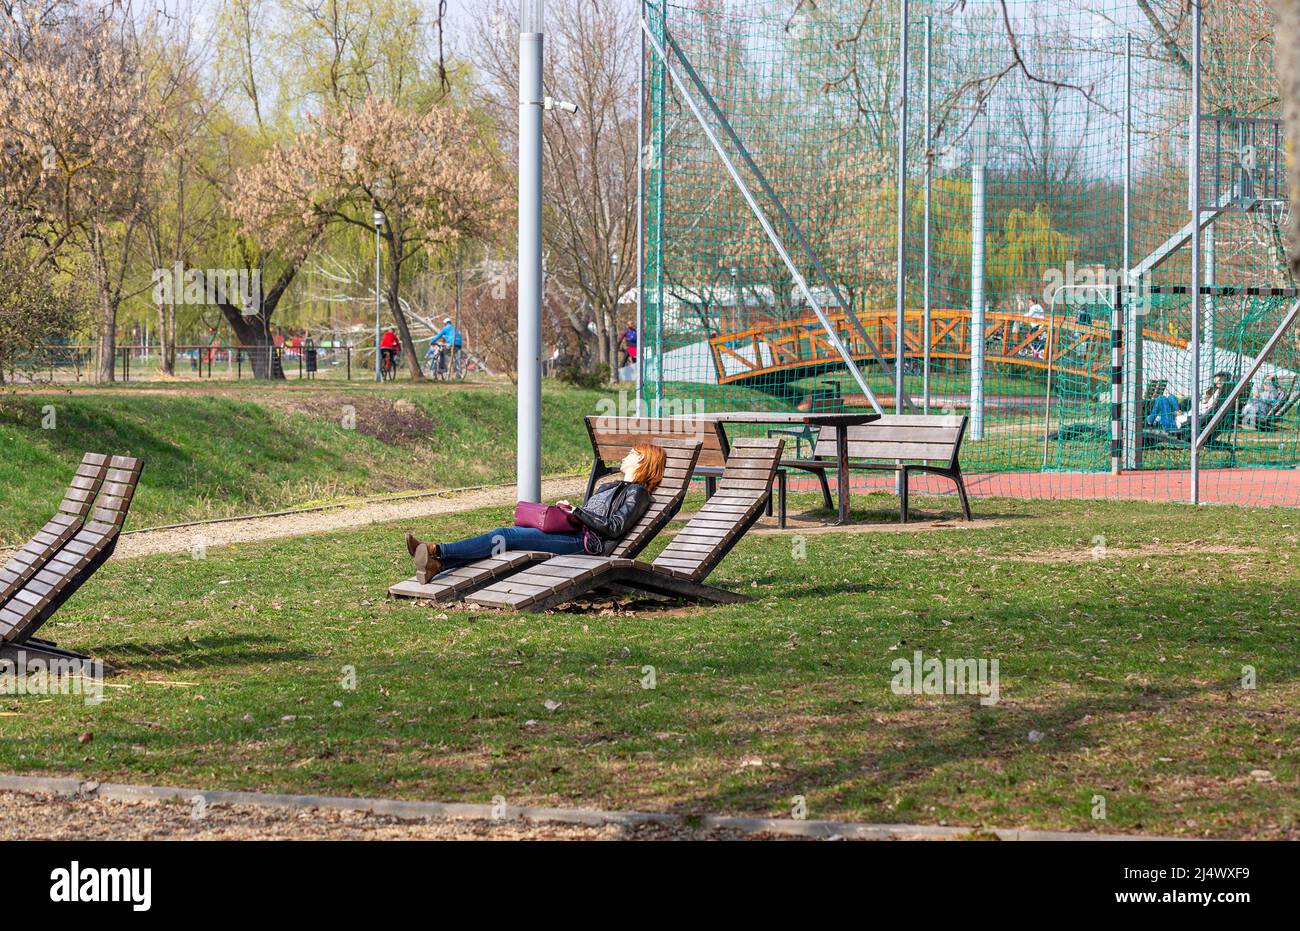 Nyiregyhaza, Hungary – March 24, 2019: Salt Lake (Sosto) Park. Wooden outdoor furniture, football field, red-haired girl resting on wooden sun lounger Stock Photo